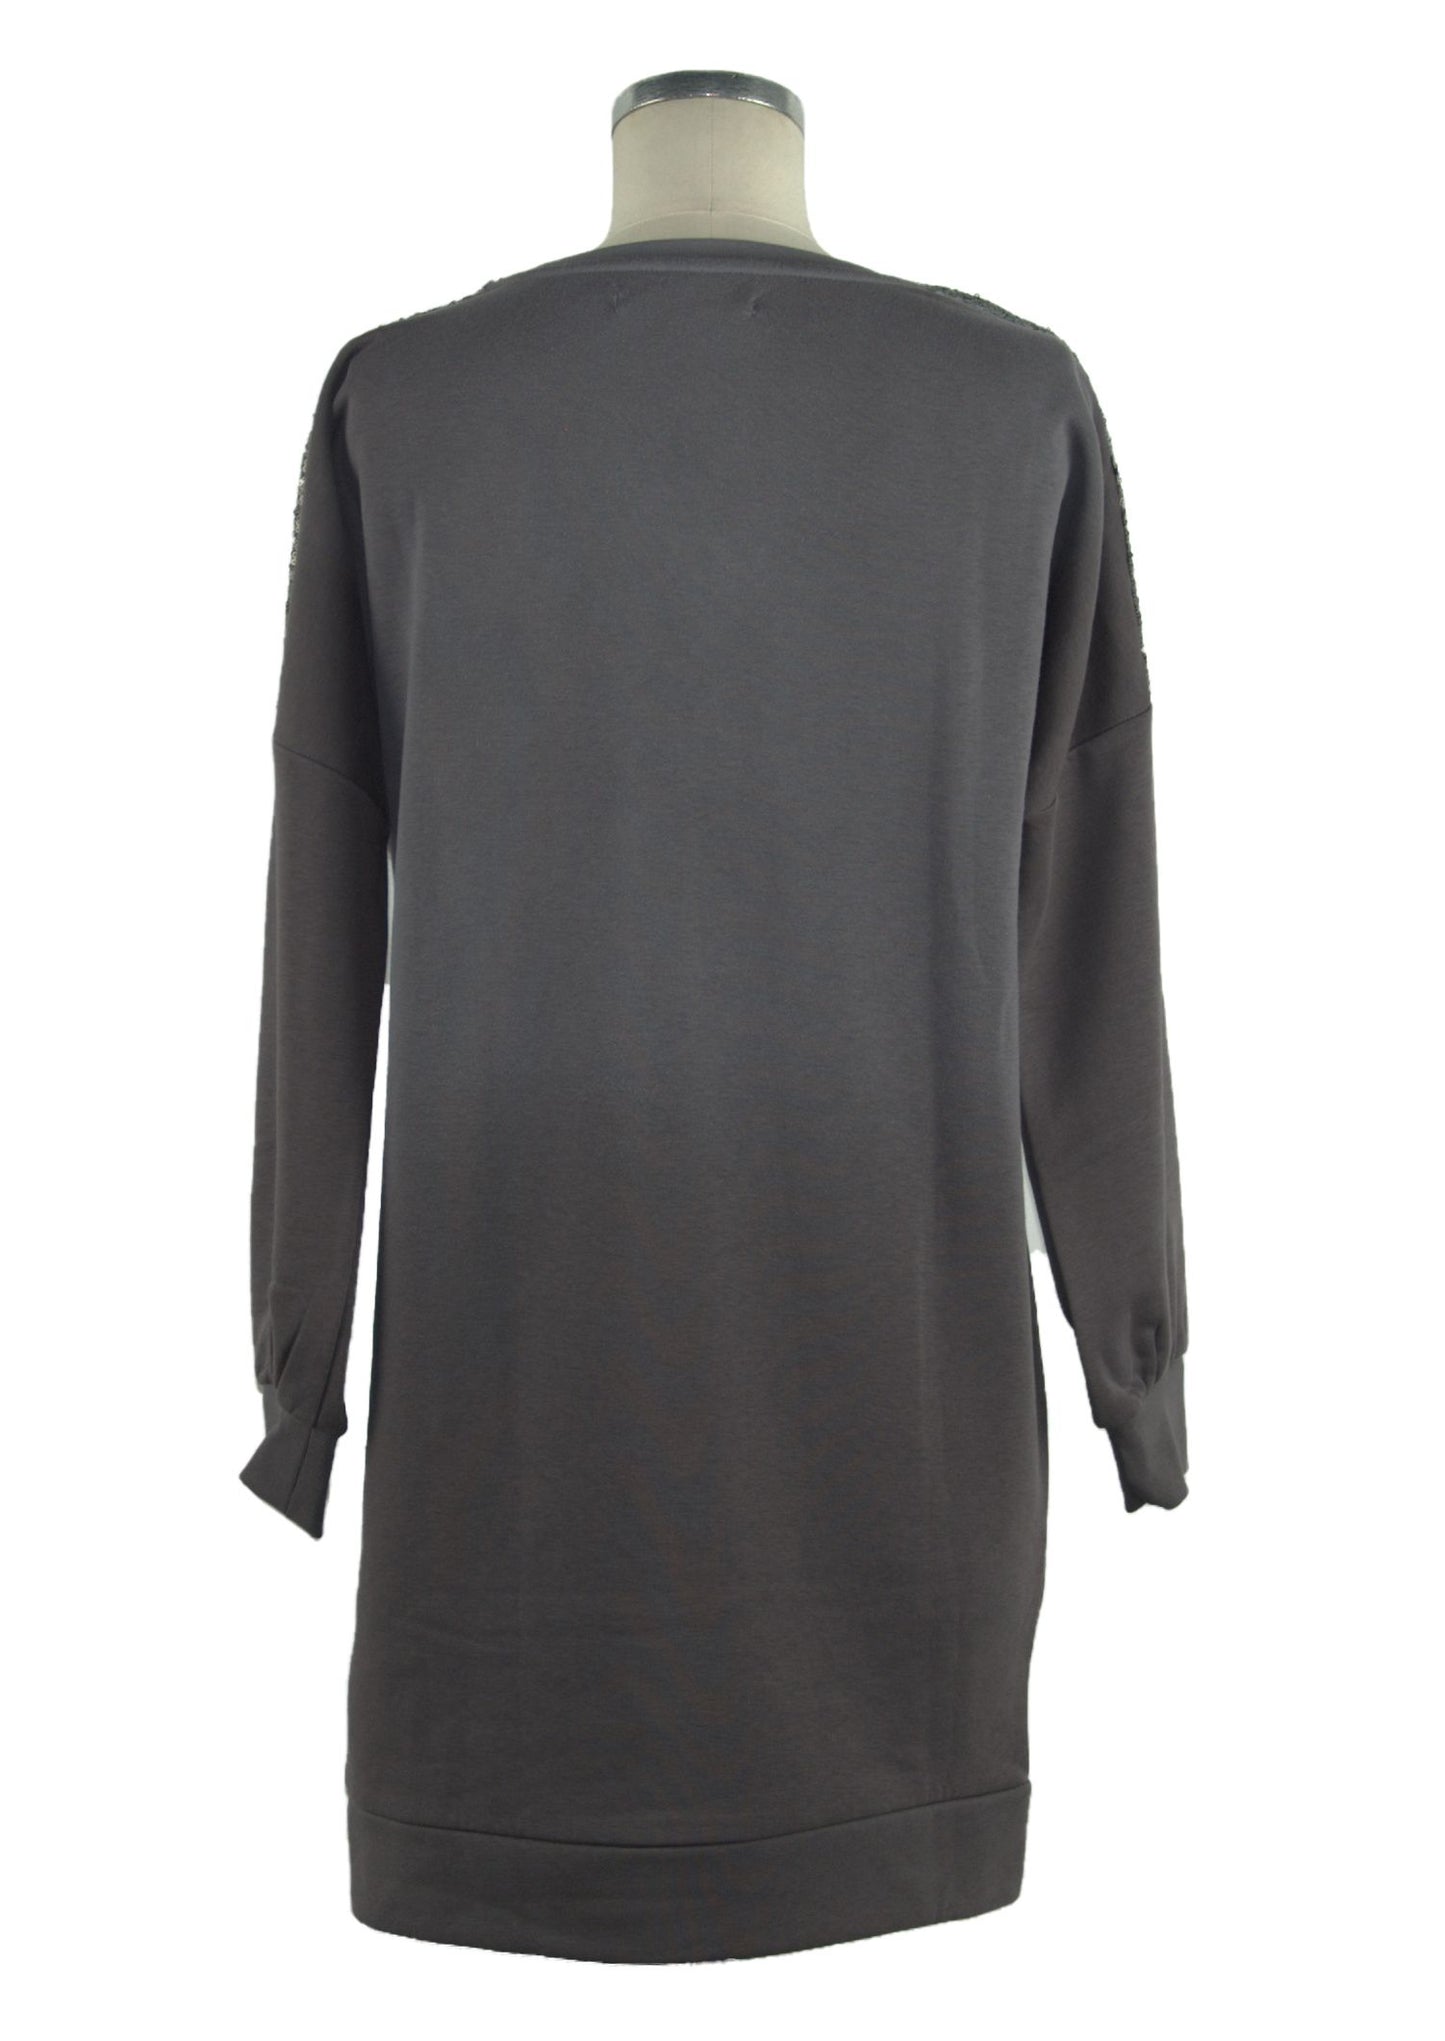 Grey Imperfect Sweatshirt Dress - Designed by Imperfect Available to Buy at a Discounted Price on Moon Behind The Hill Online Designer Discount Store